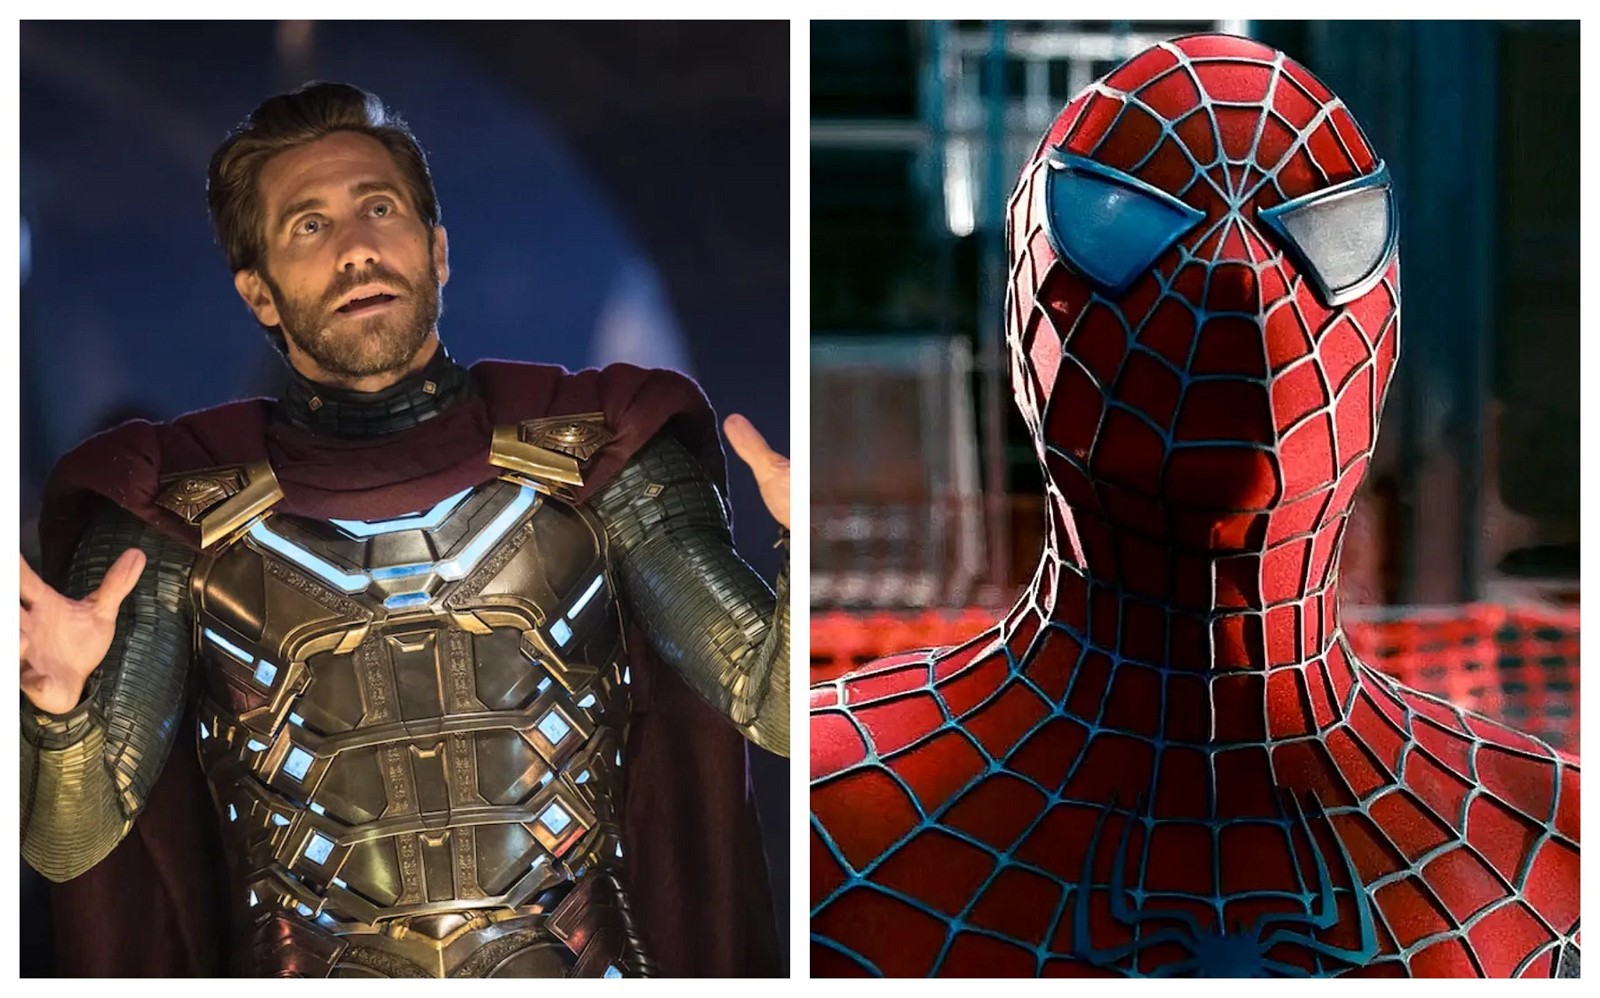 Jake Gyllenhaal could have almost become Spider-man